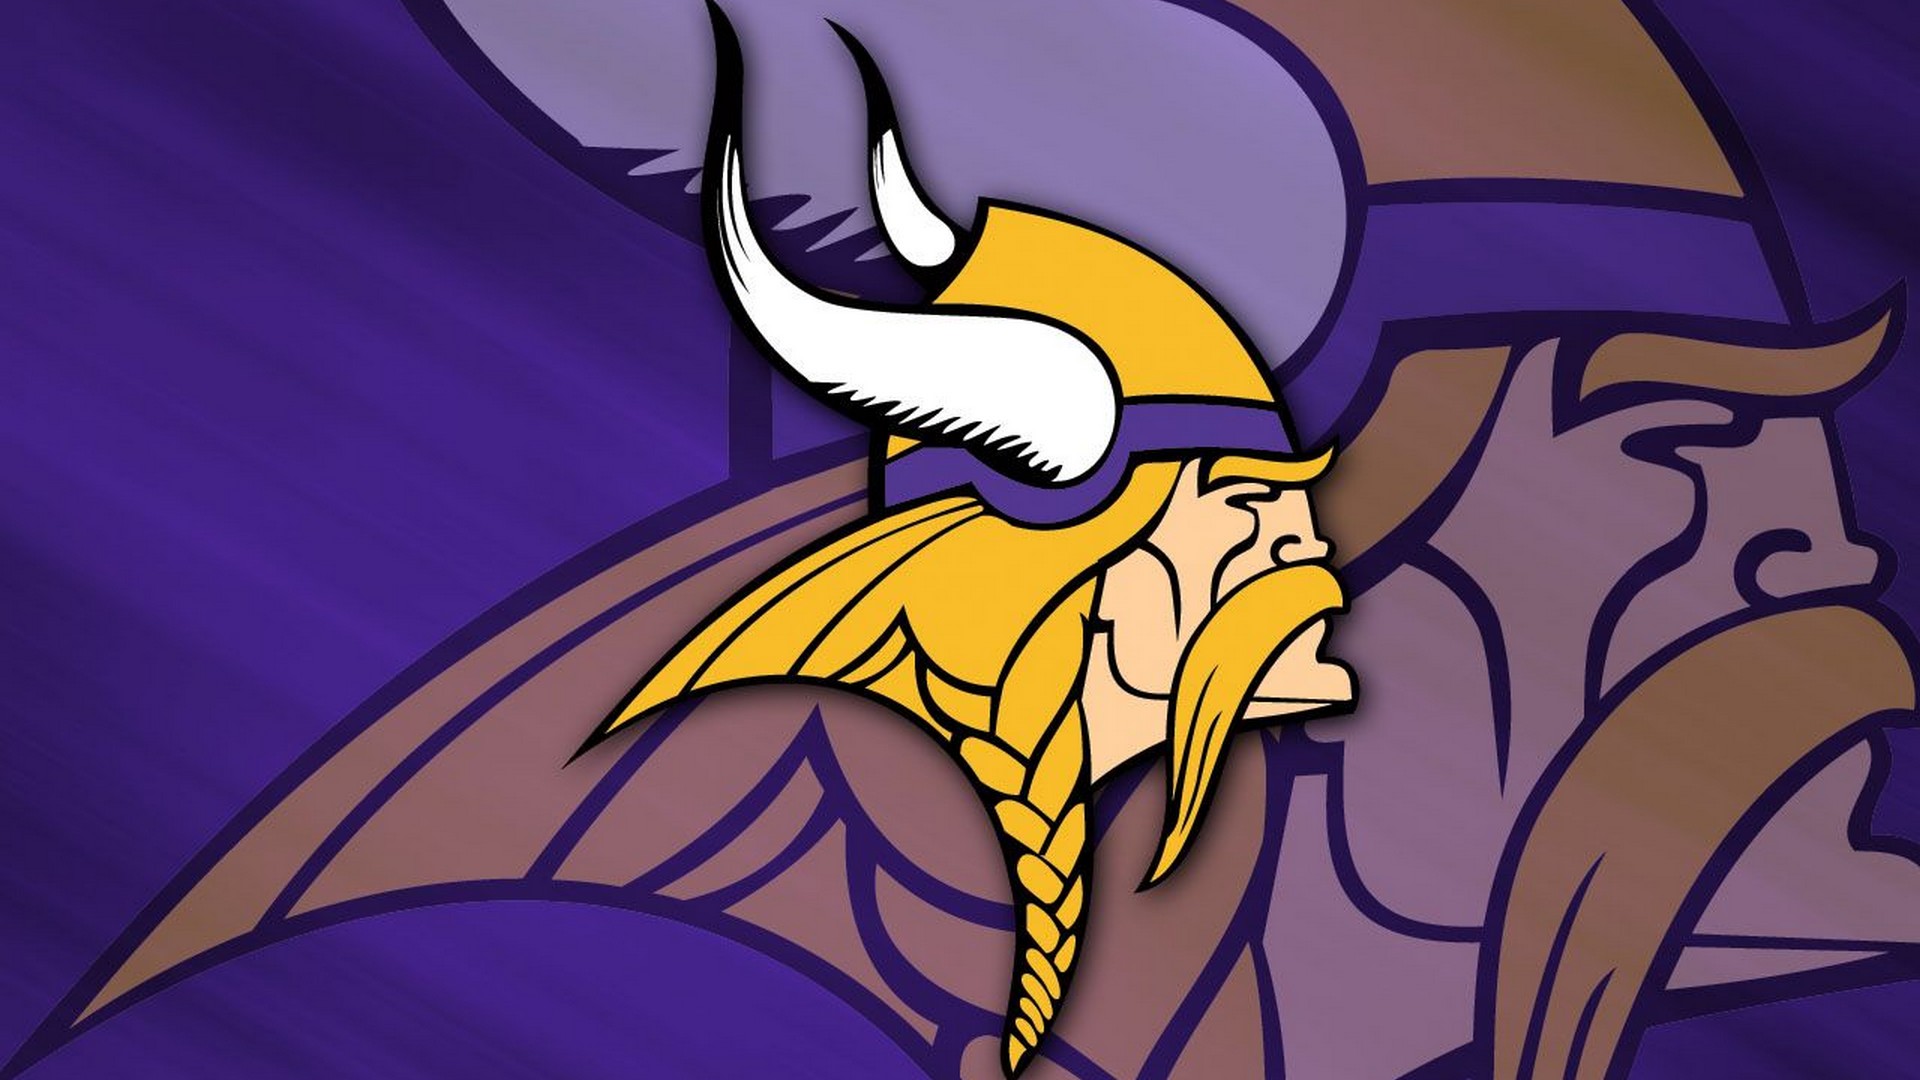 Backgrounds Minnesota Vikings HD with resolution 1920x1080 pixel. You can make this wallpaper for your Mac or Windows Desktop Background, iPhone, Android or Tablet and another Smartphone device